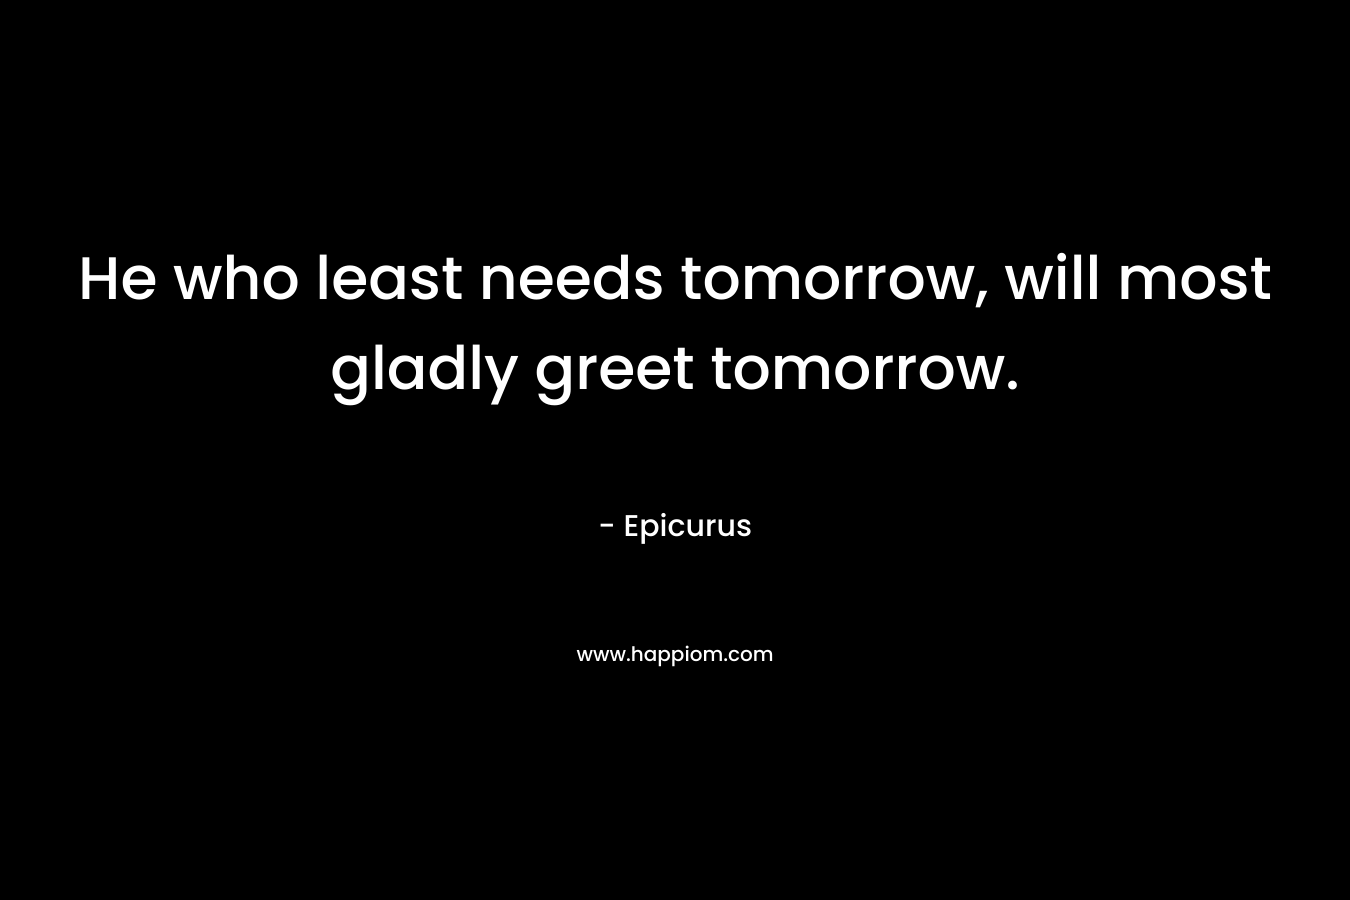 He who least needs tomorrow, will most gladly greet tomorrow. – Epicurus